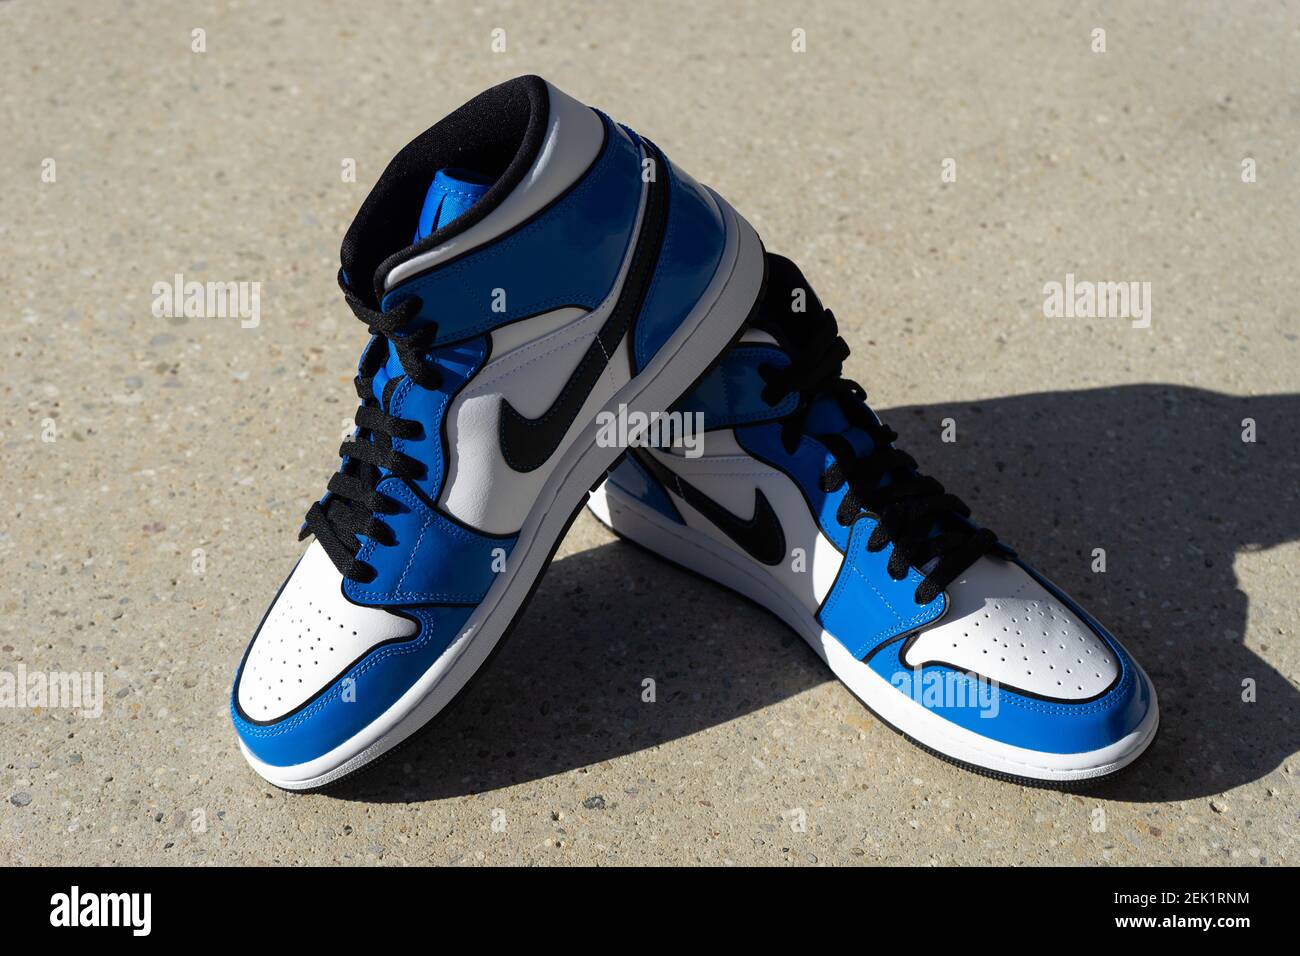 Air Jordan 1 High Resolution Stock Photography and Images - Alamy